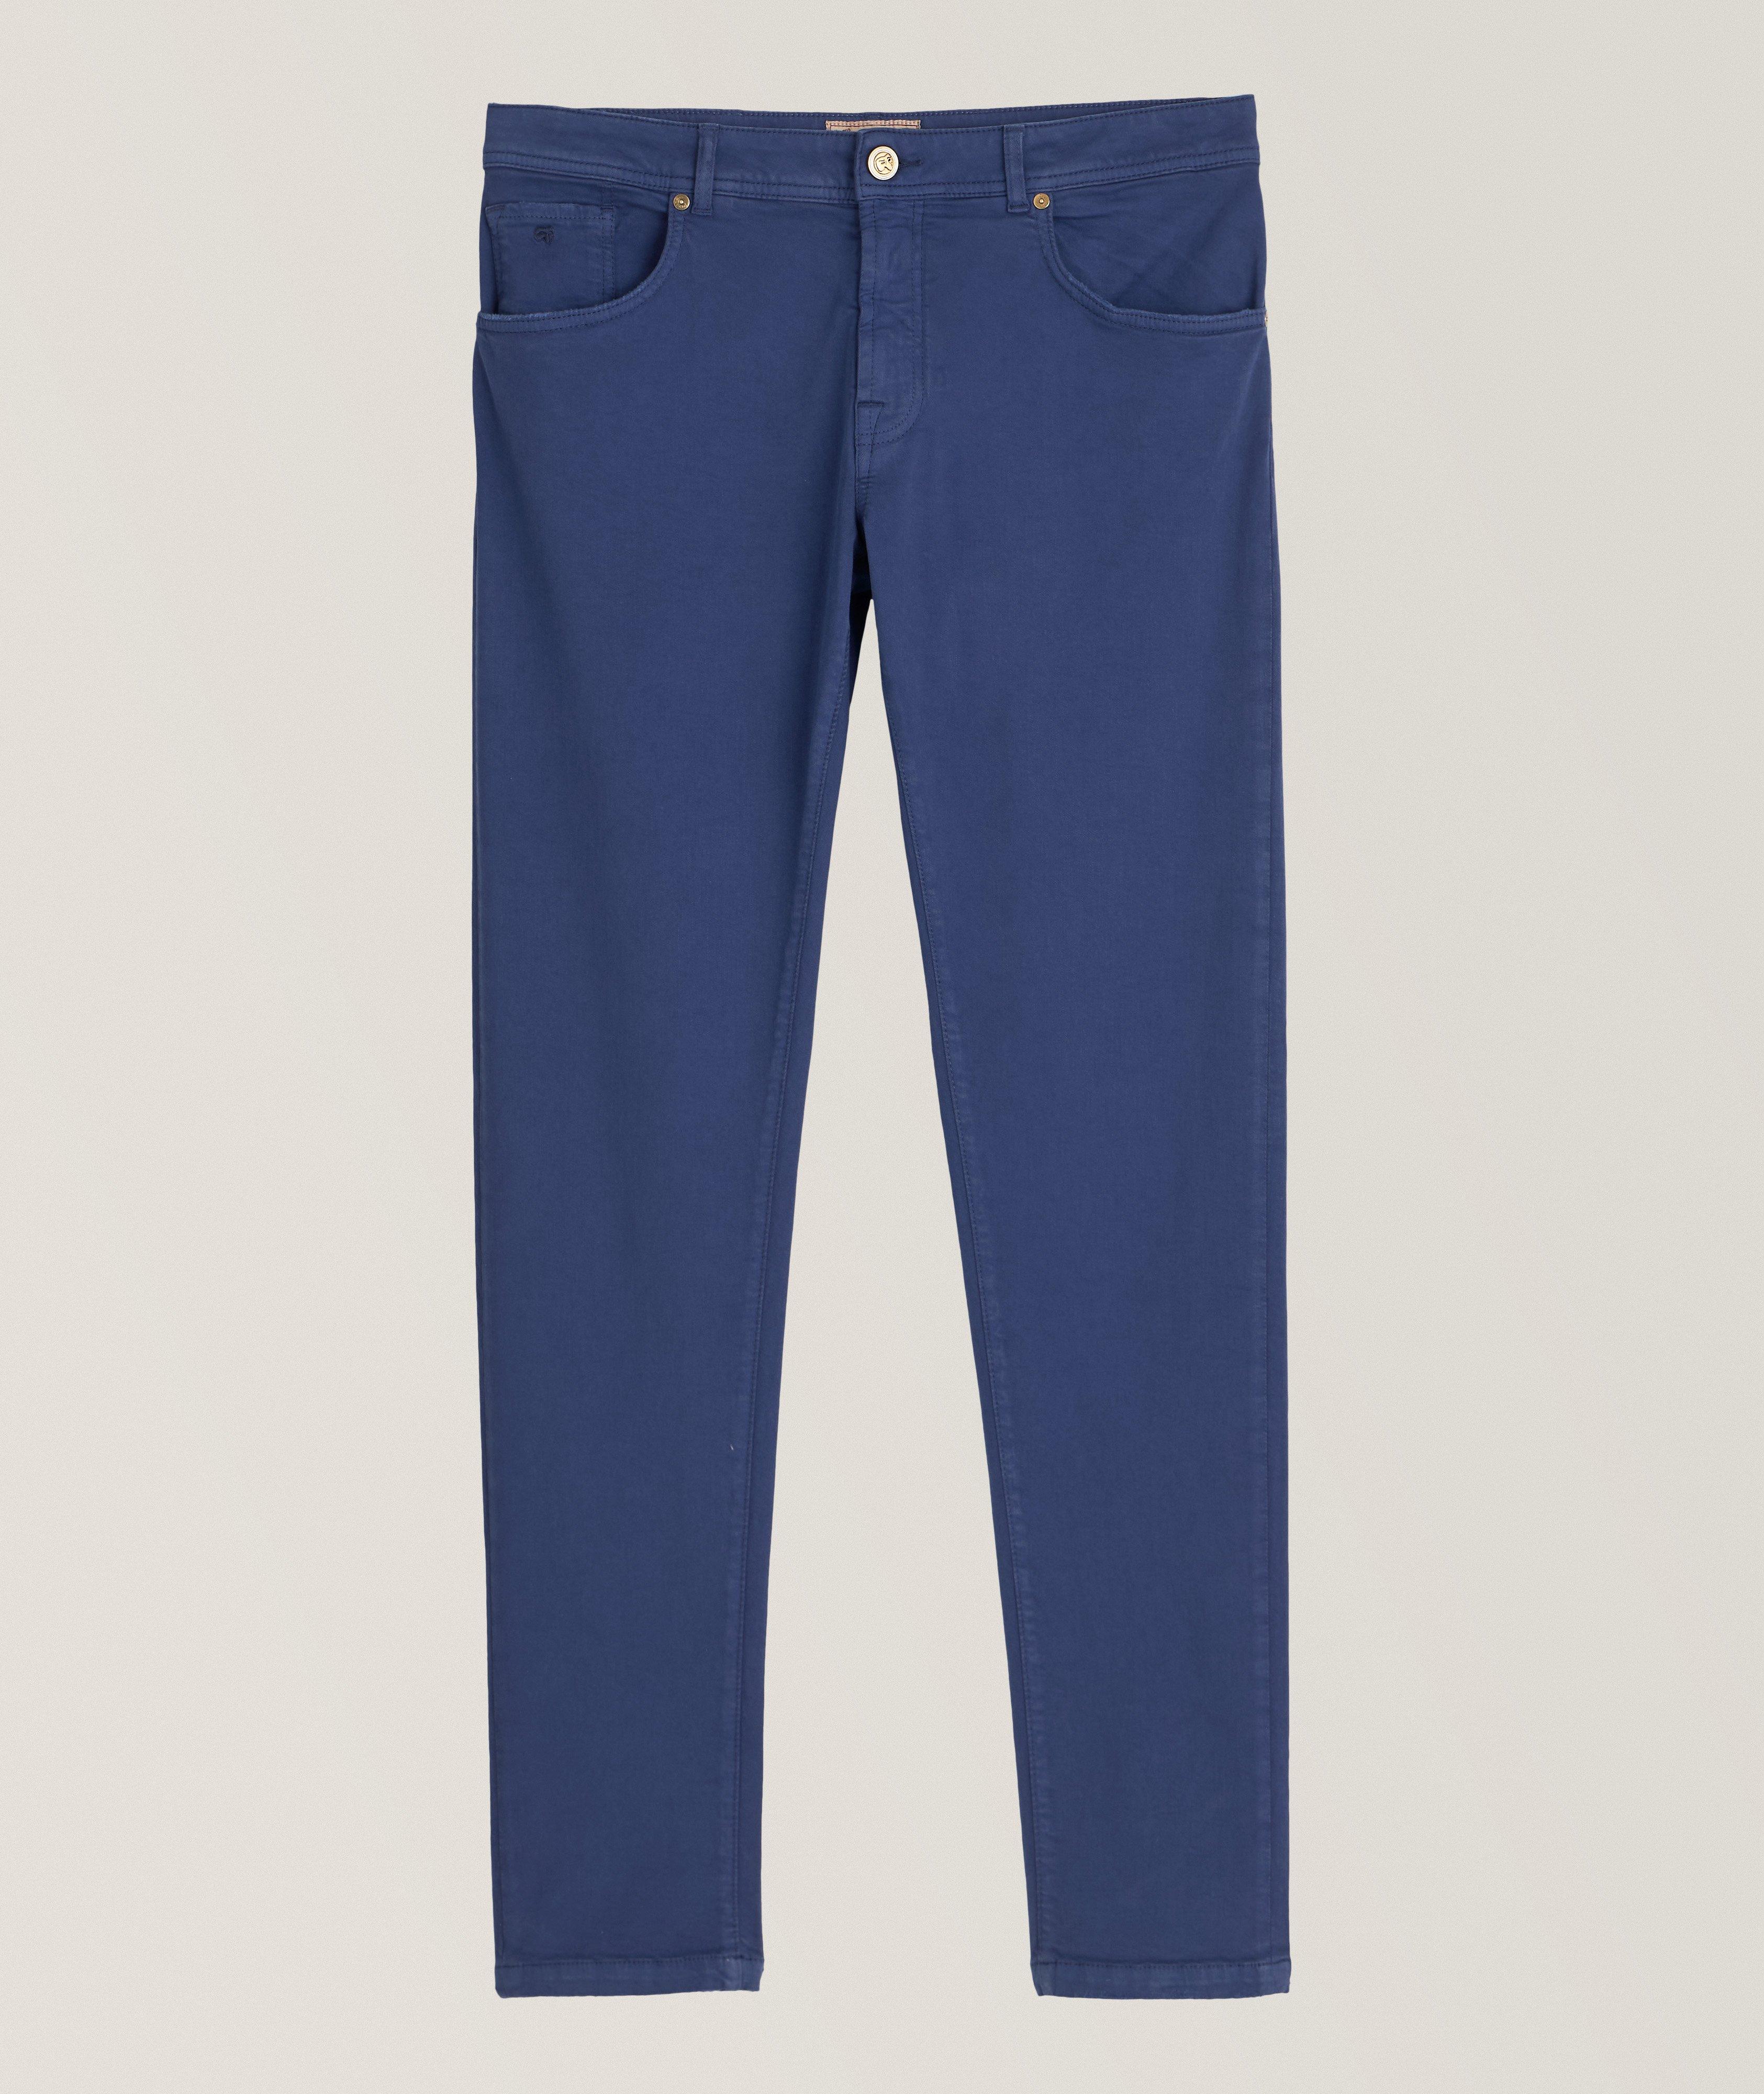 Limited Edition 5-Pocket Style Stretch-Cotton Jeans